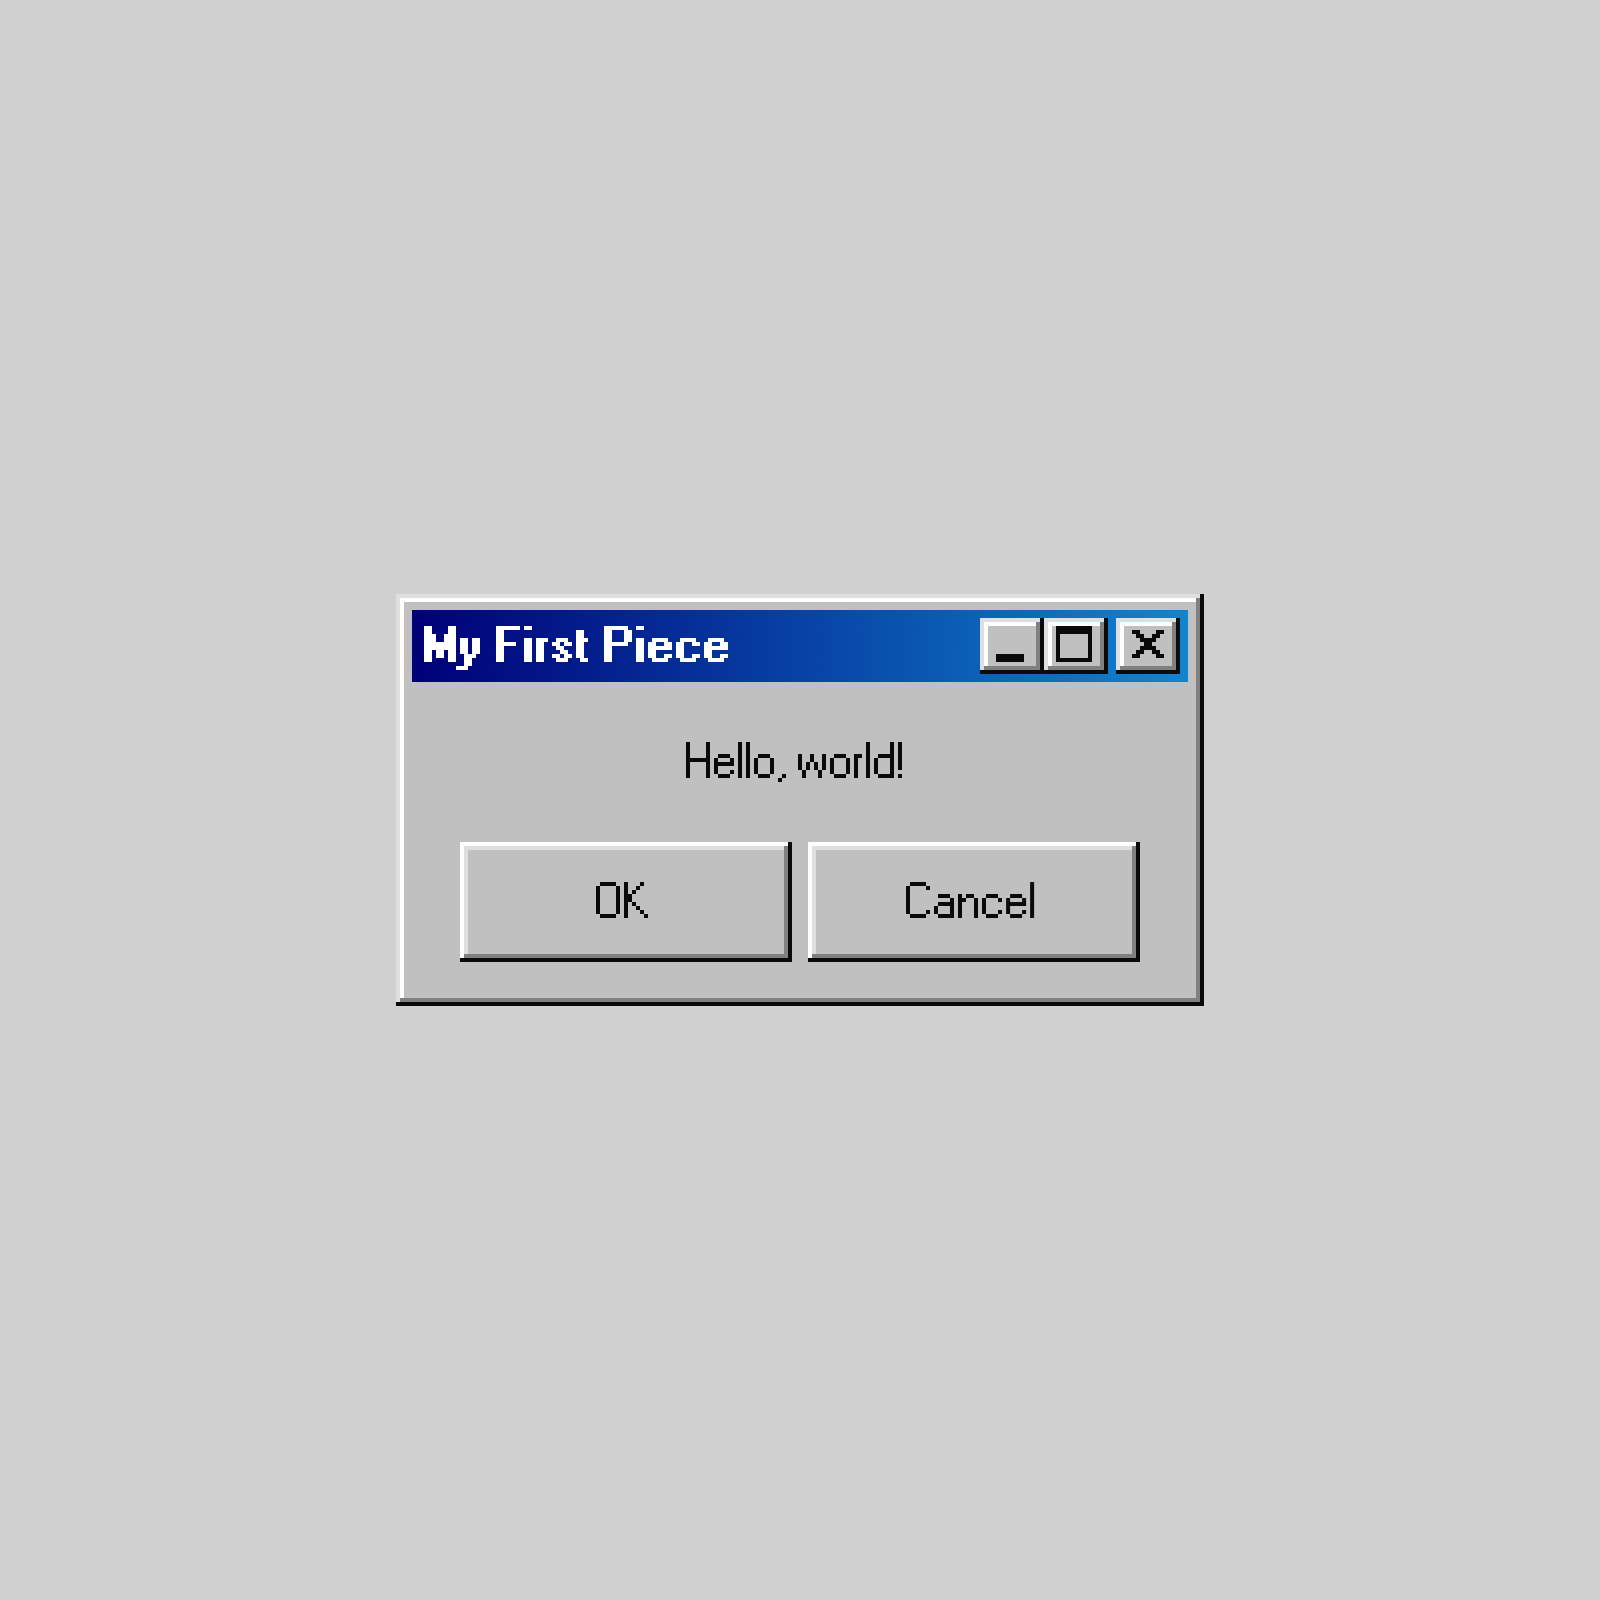 A window with the title "My First Piece." There is a minimize, maximize, and close button. In the window is the text "Hello, world!" centered and two buttons beneath. They are labeled "OK" and "Cancel"